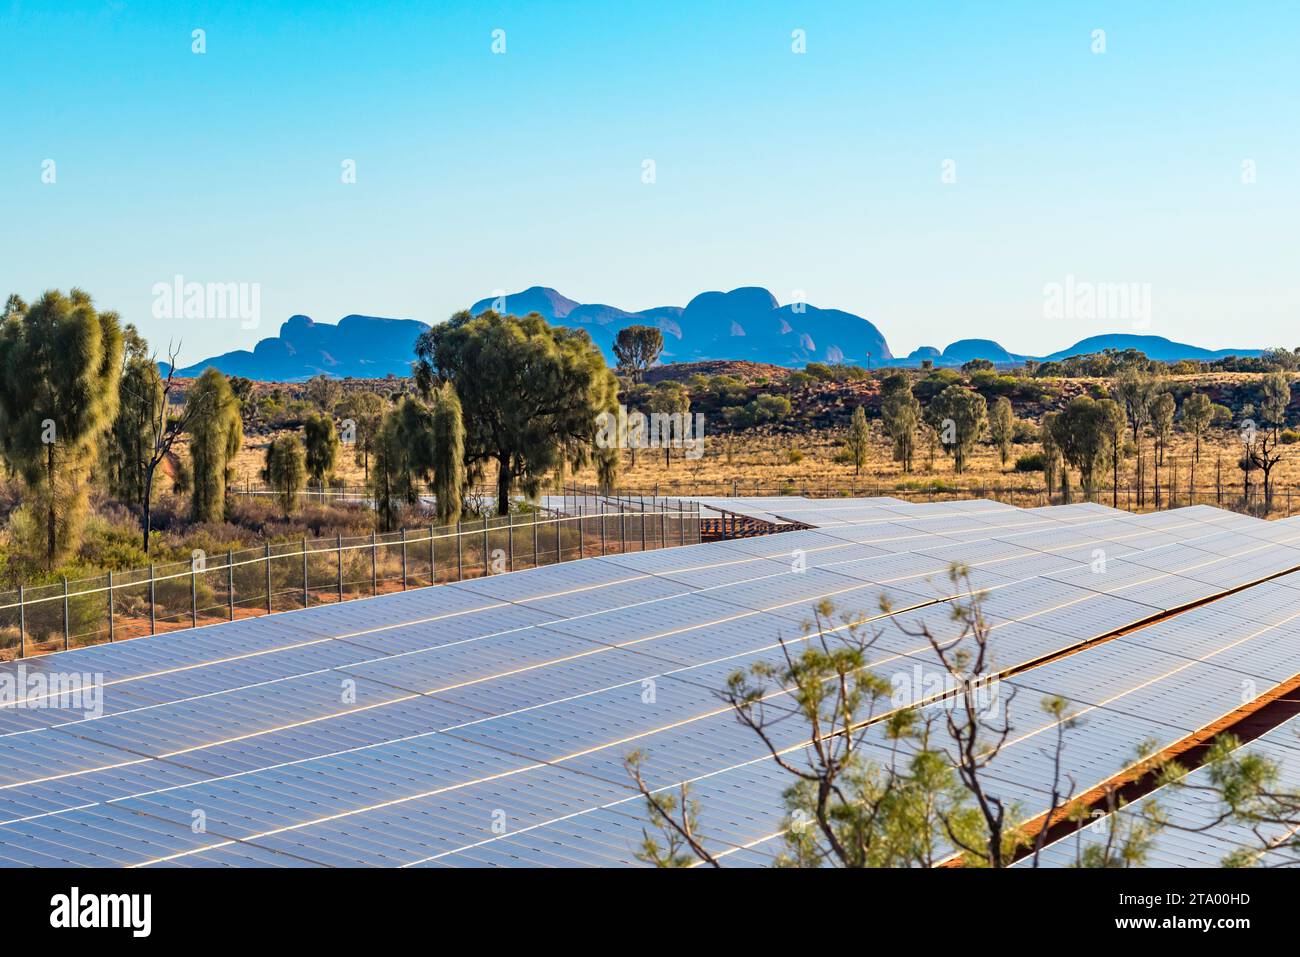 Part of the Tjintu Solar Field at Ayers Rock Resort in Central Australia. The photovoltaic panels (PV) provide up to 30% of the resort's power needs Stock Photo